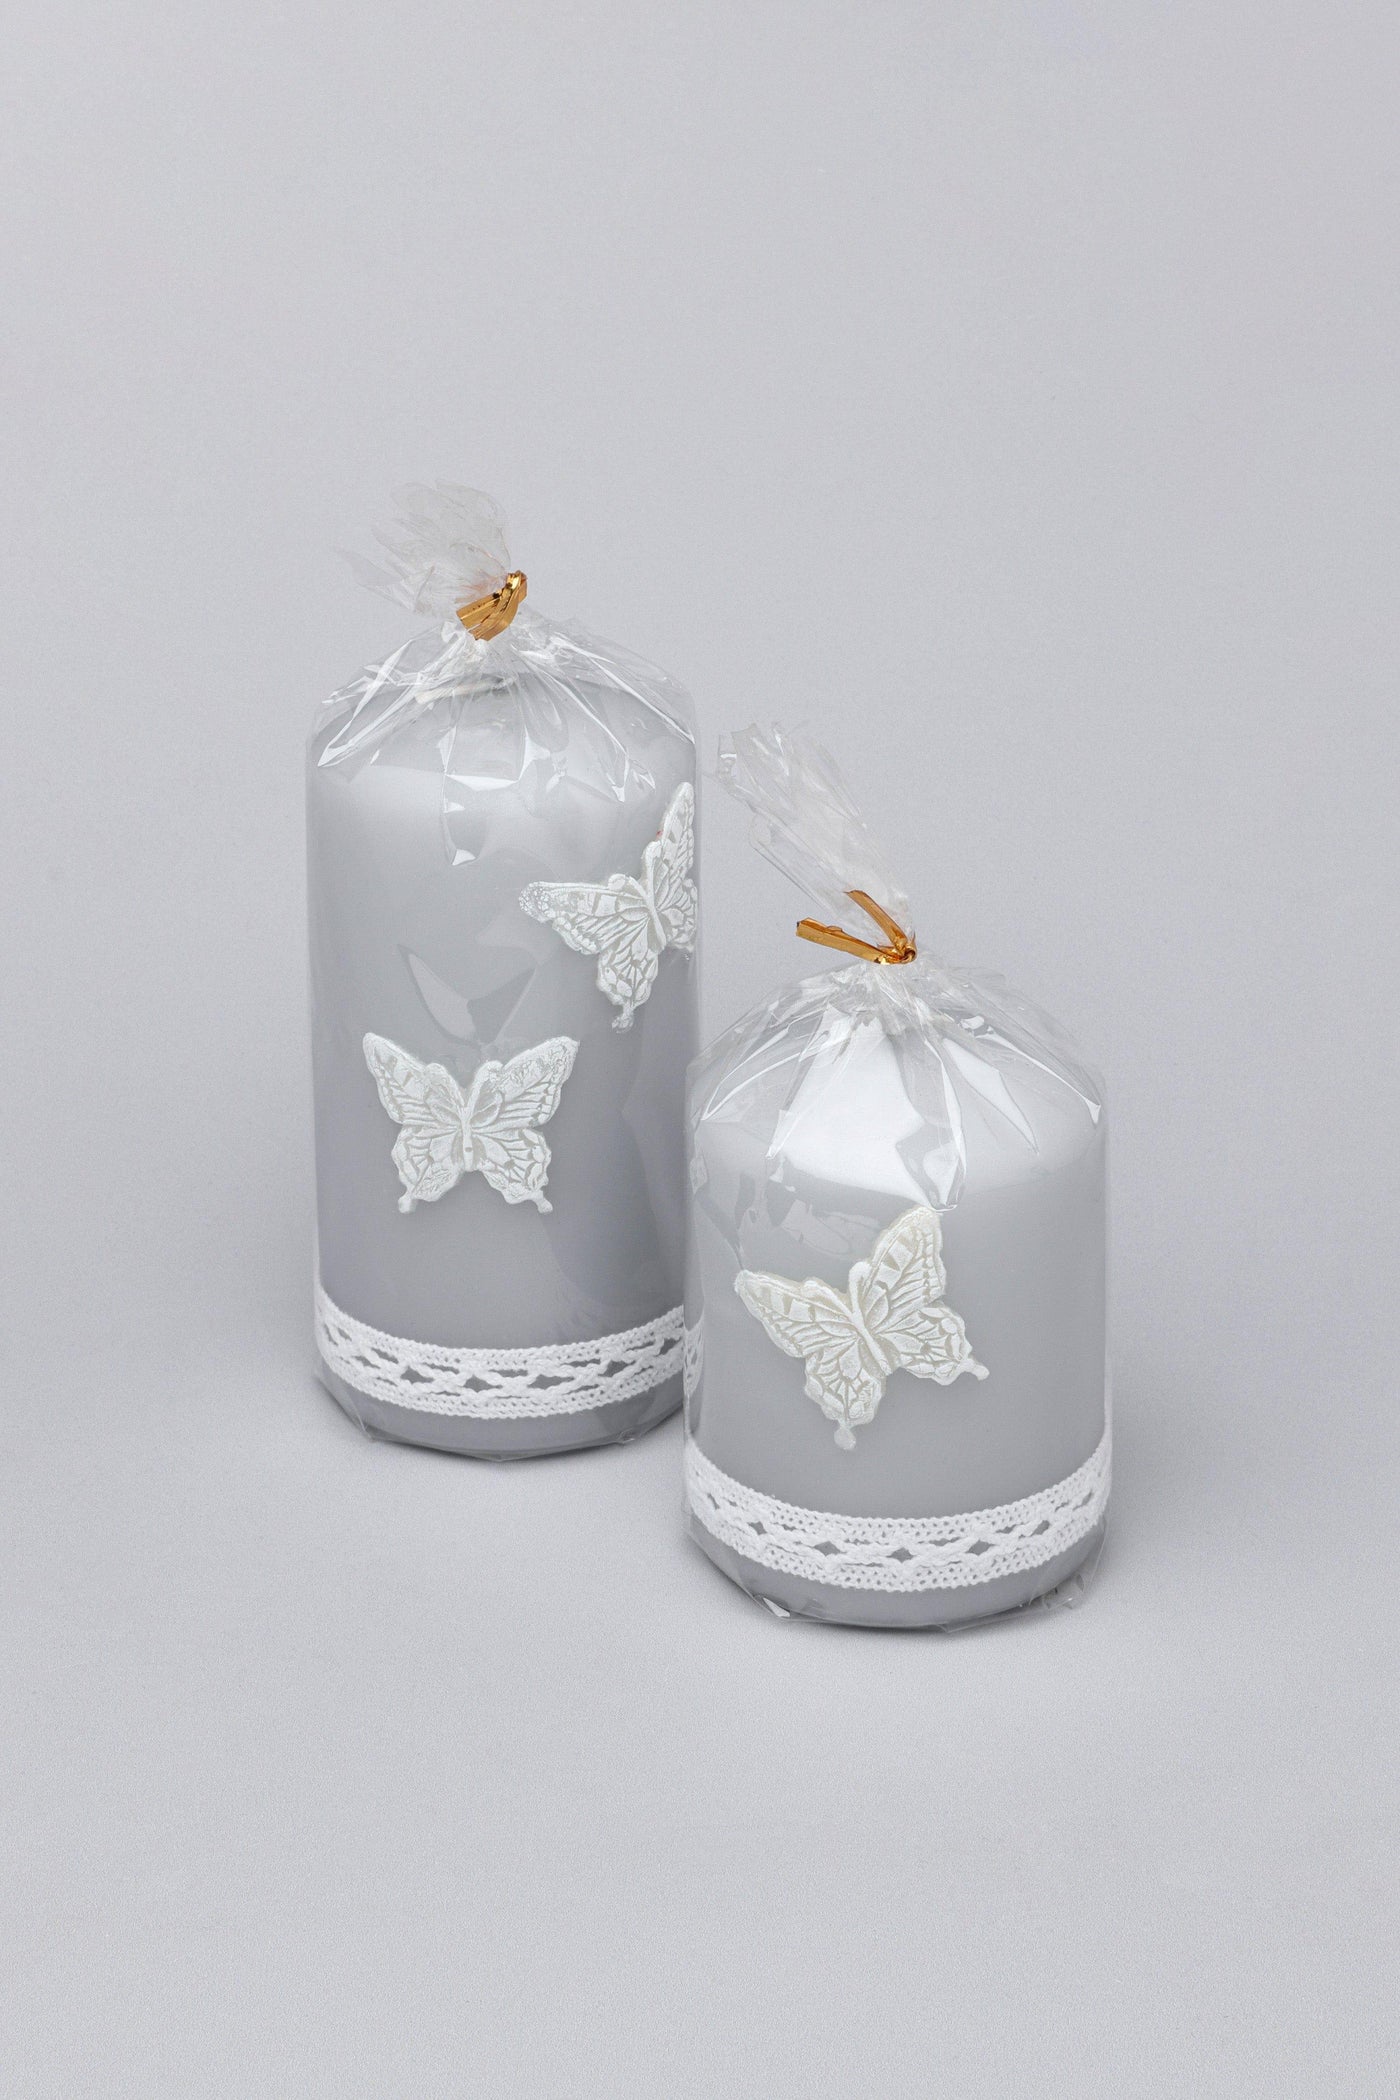 G Decor Candles Emilie Butterfly Grey Lace Pillar Candle